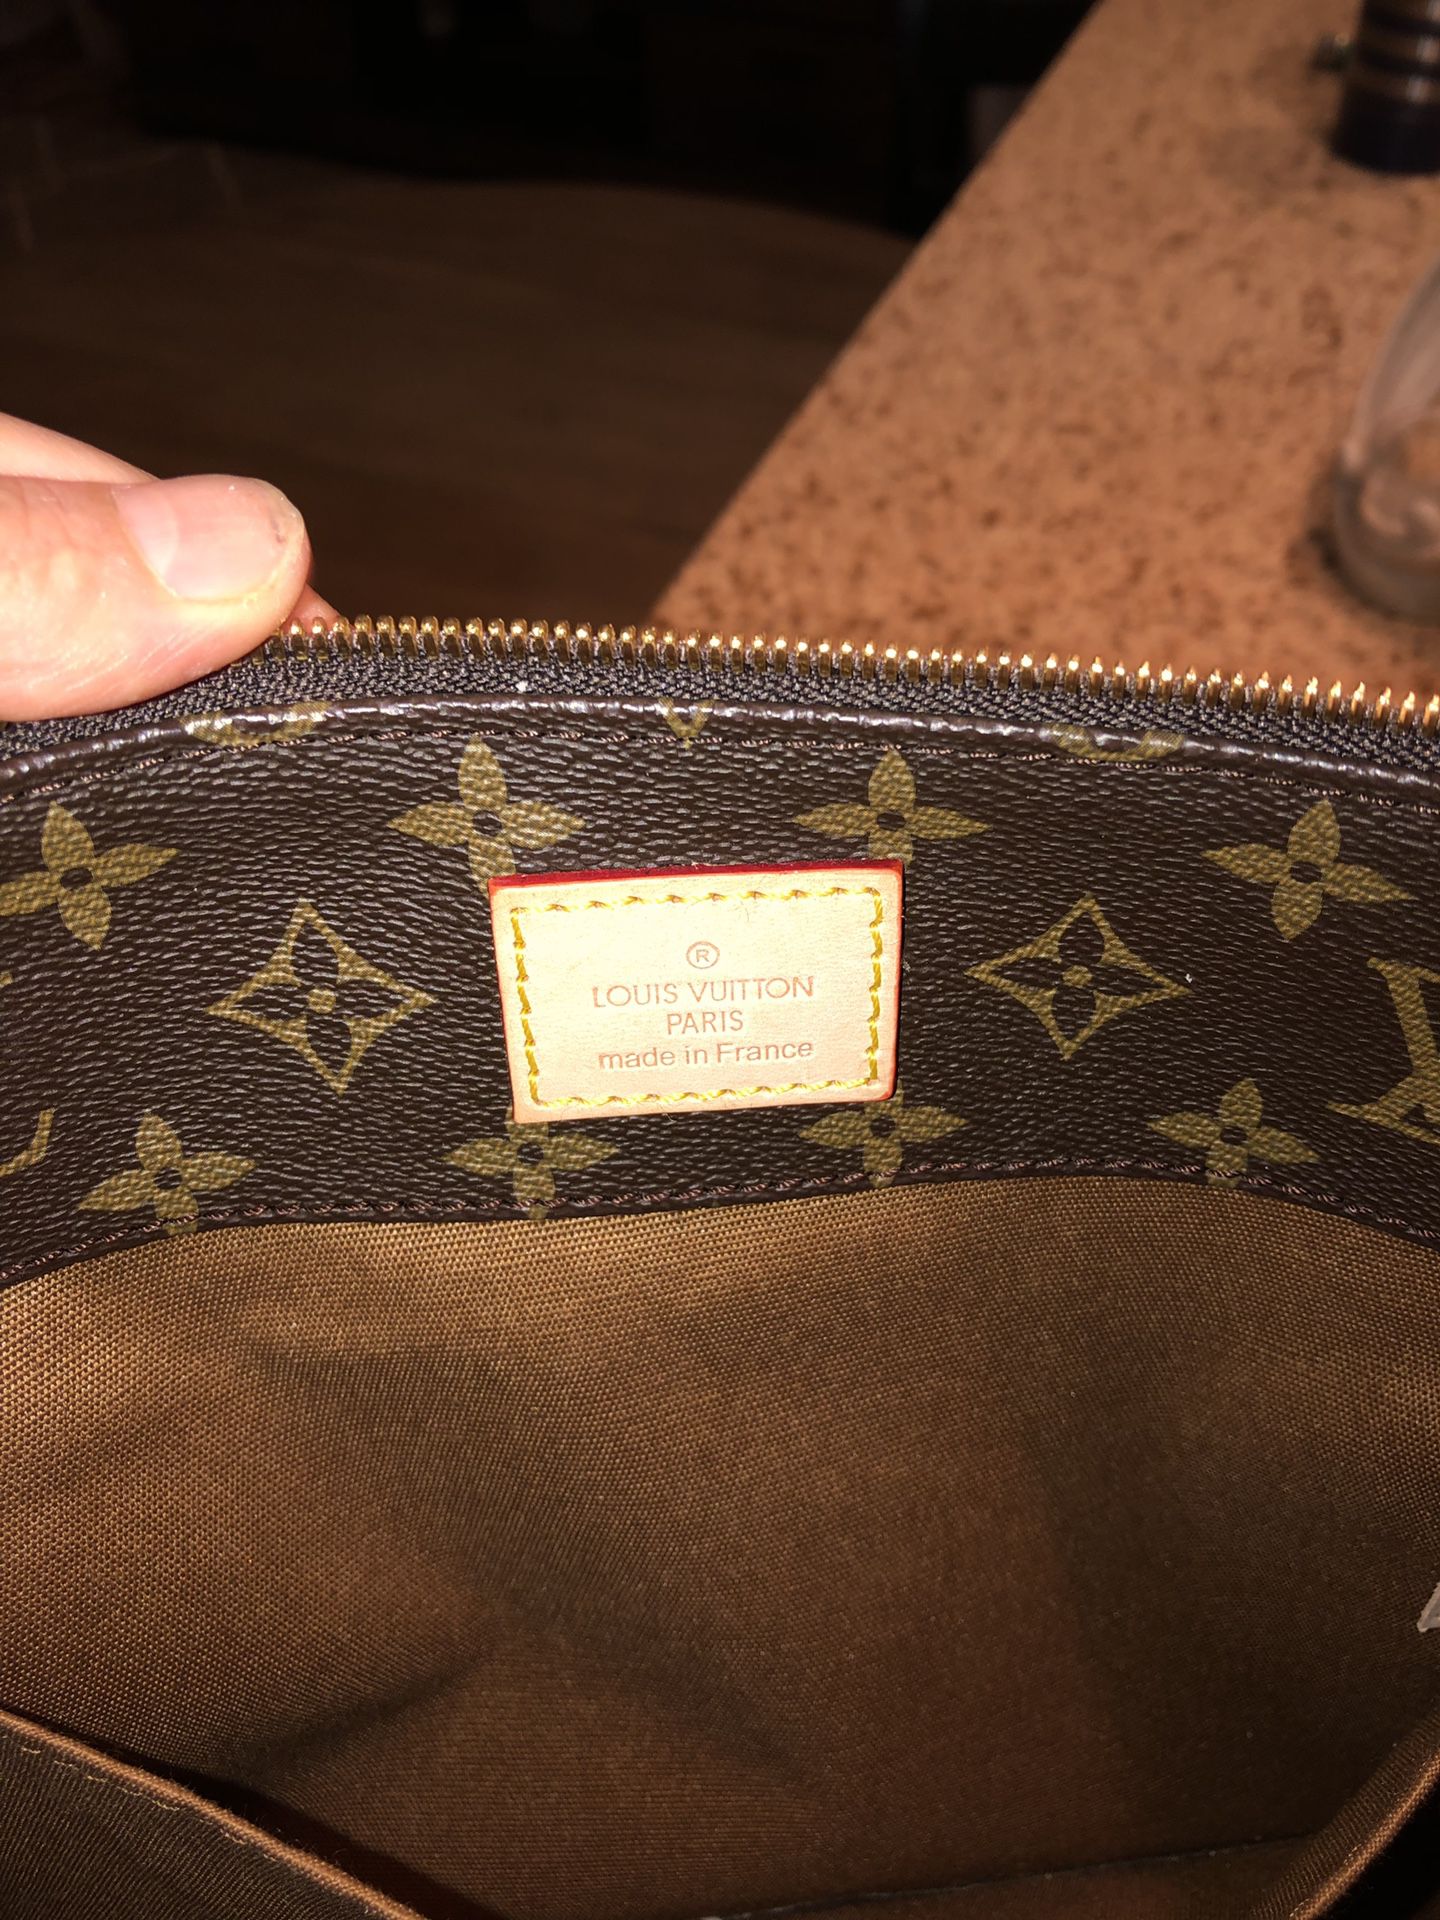 Louis Vuitton Handbag Used for Sale in Sully Station, VA - OfferUp